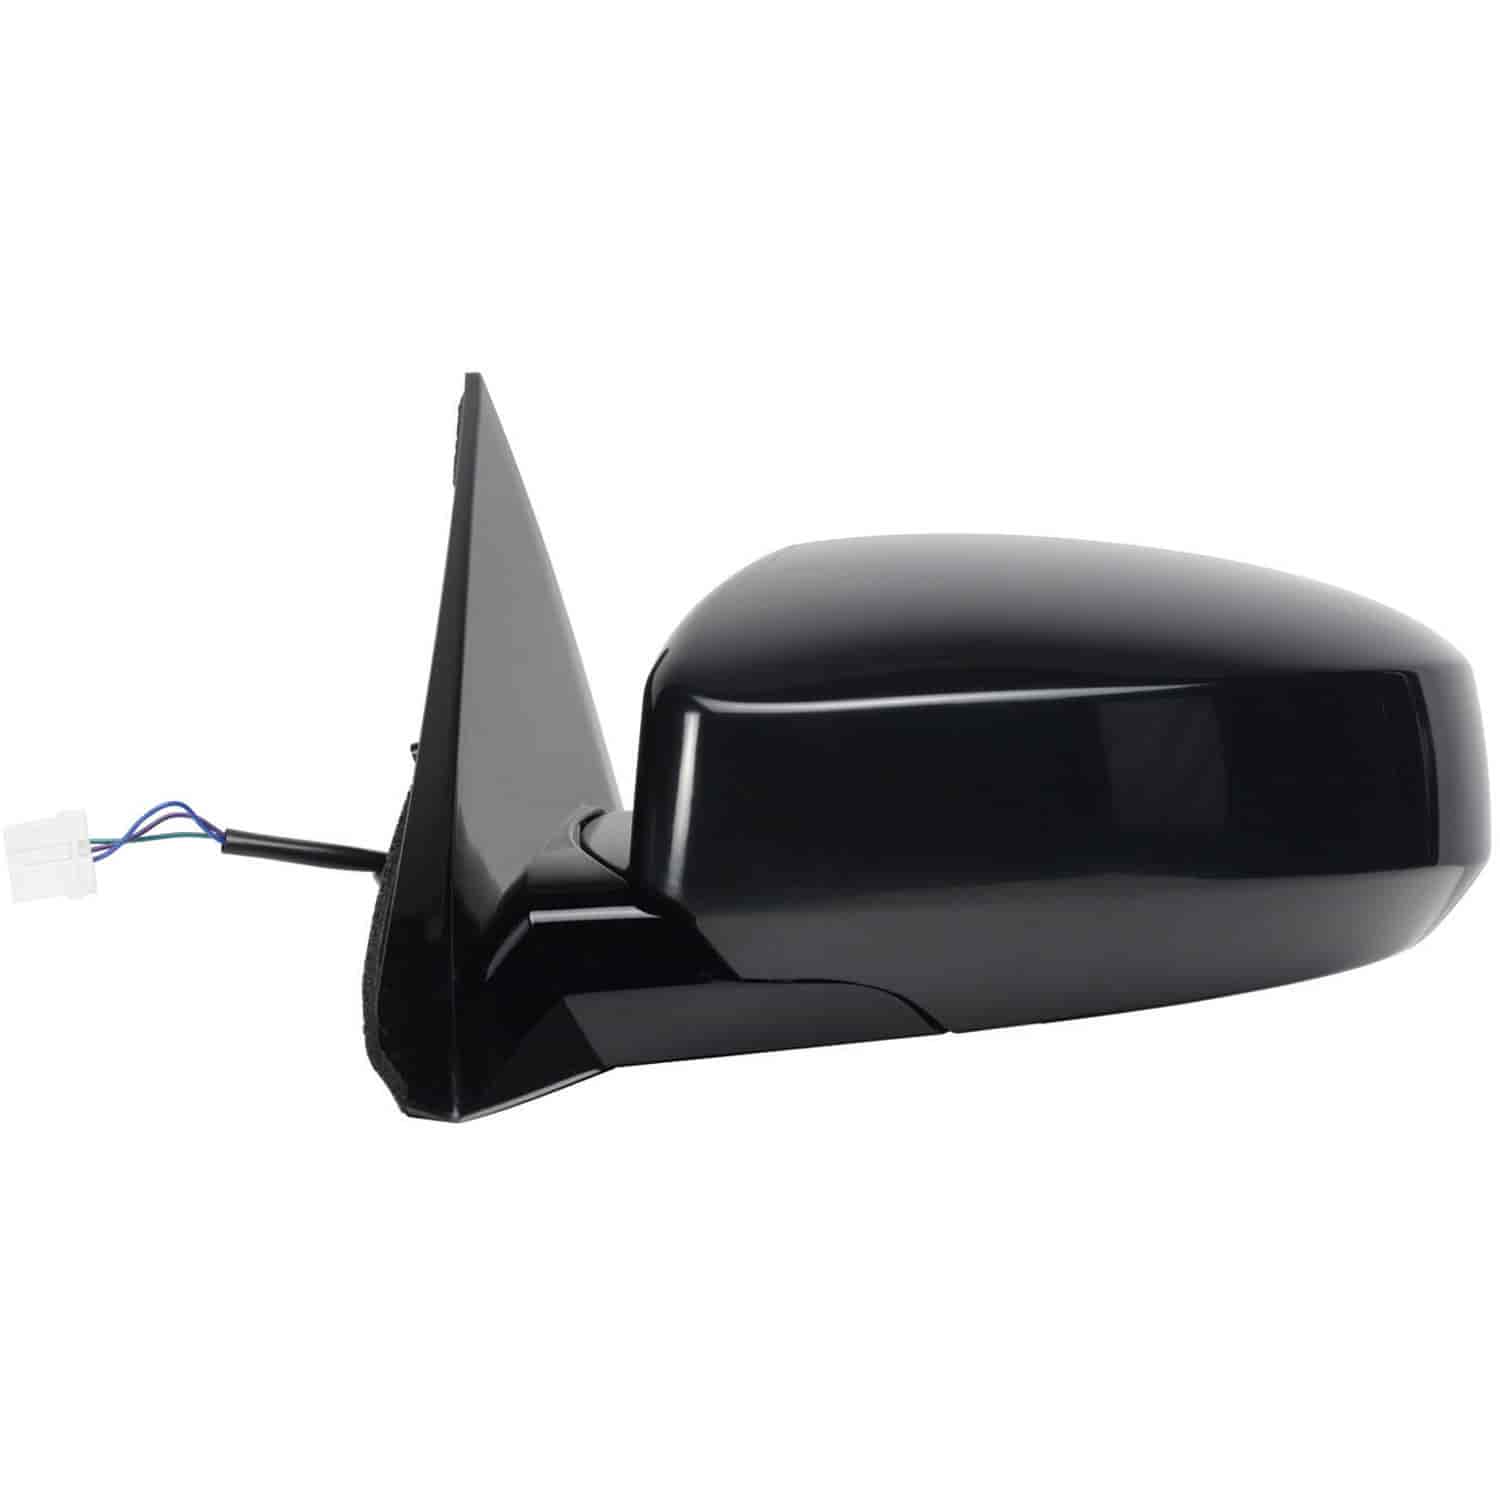 OEM Style Replacement mirror for 04-08 Nissan Maxima driver side mirror tested to fit and function l